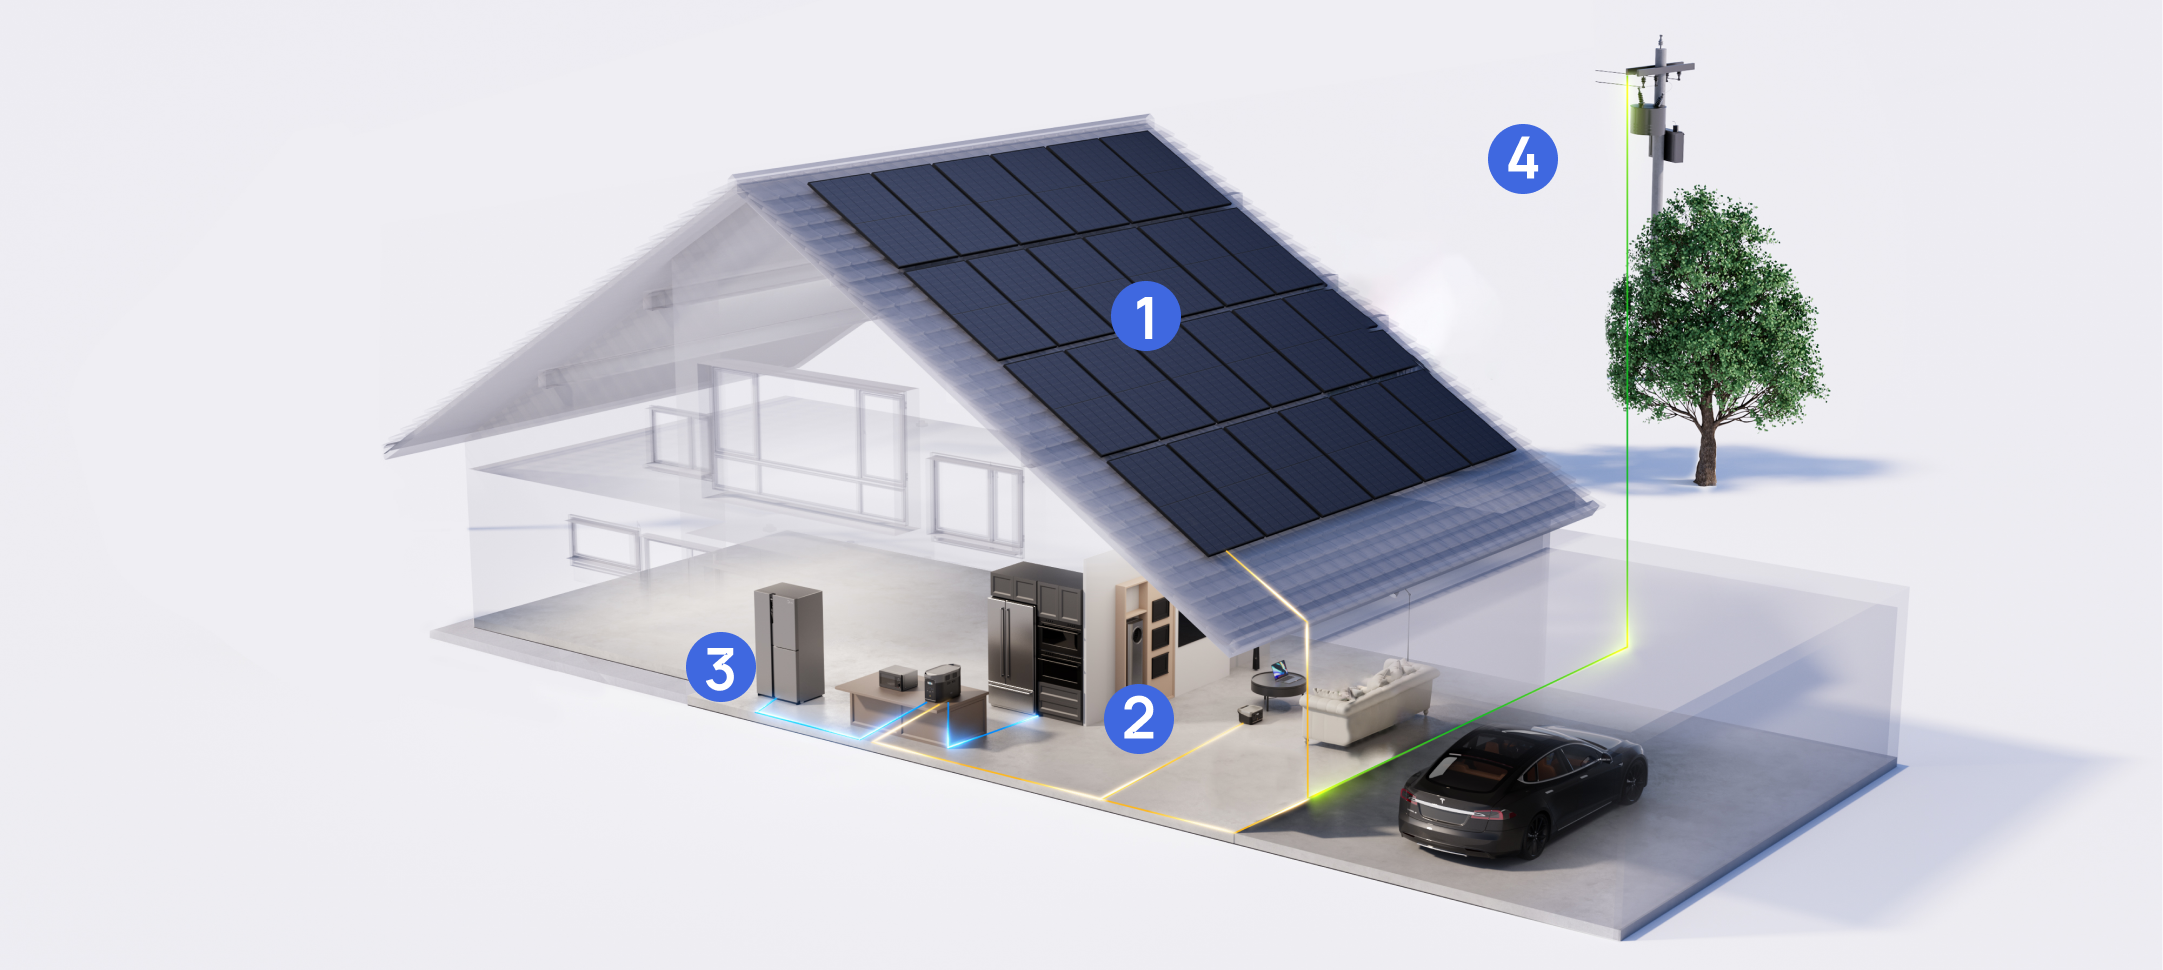 Solar panels capture sunlight and convert it into direct current, which is then turned into alternating current by an inverter to be utilized by appliances. The solar energy generated is consumed by home circuits while the surplus goes into the power grid or is stored in batteries for later use.